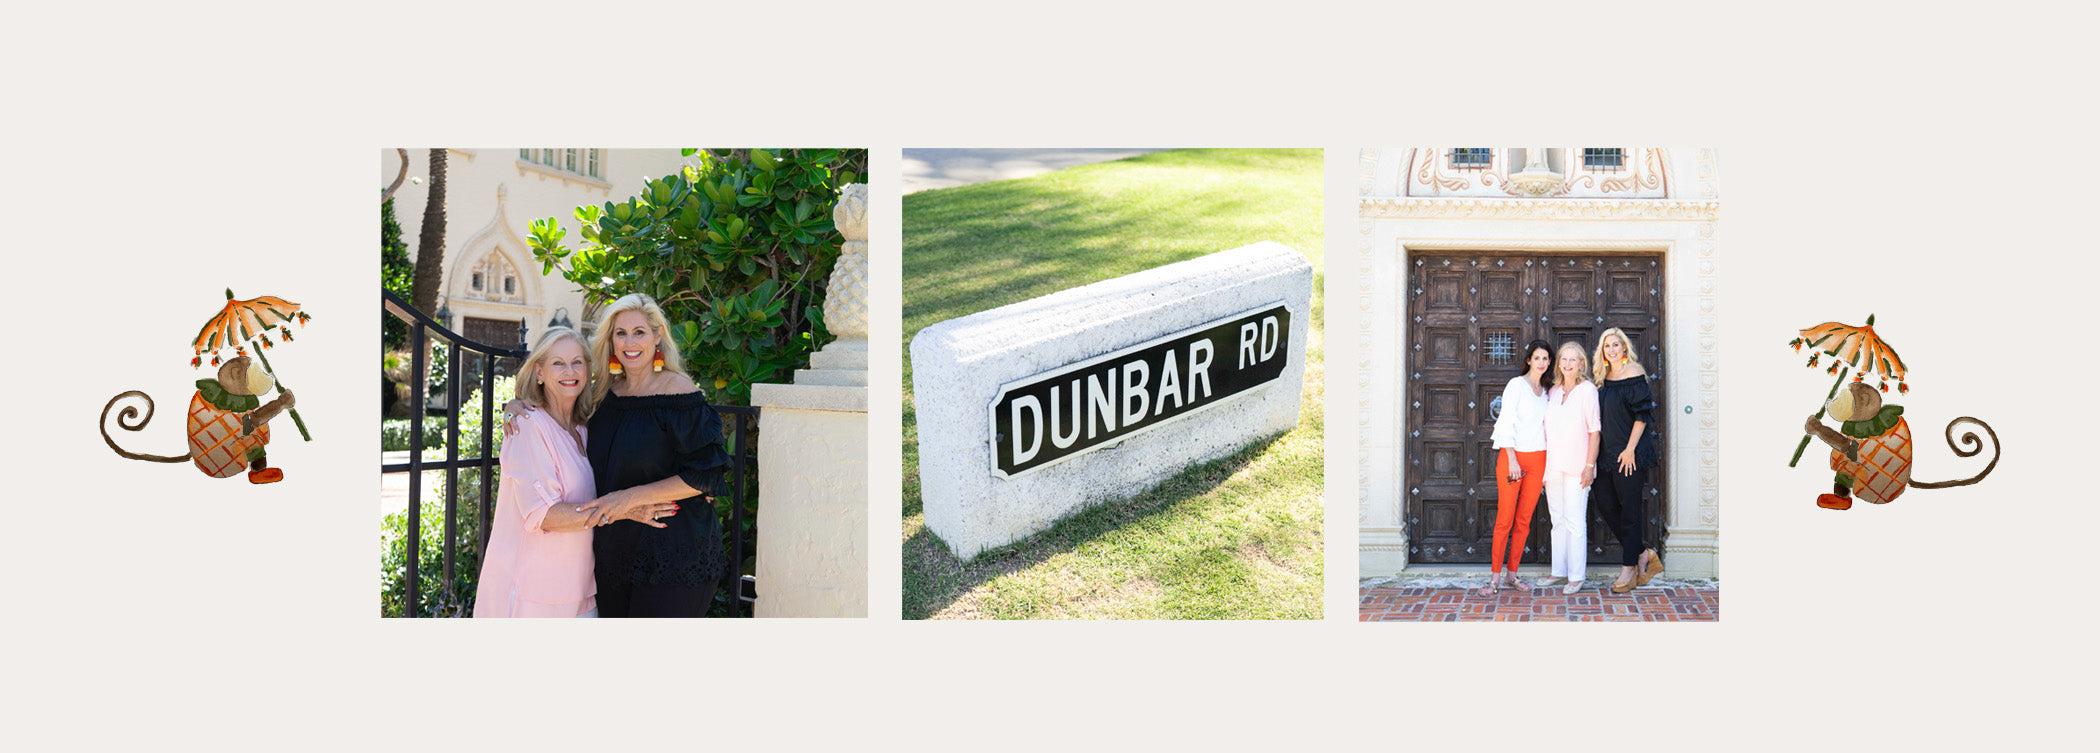 Selection of photos from Carla, including one with her mother, her sister, the Dunbar Road sign, flanked by two monkeys.